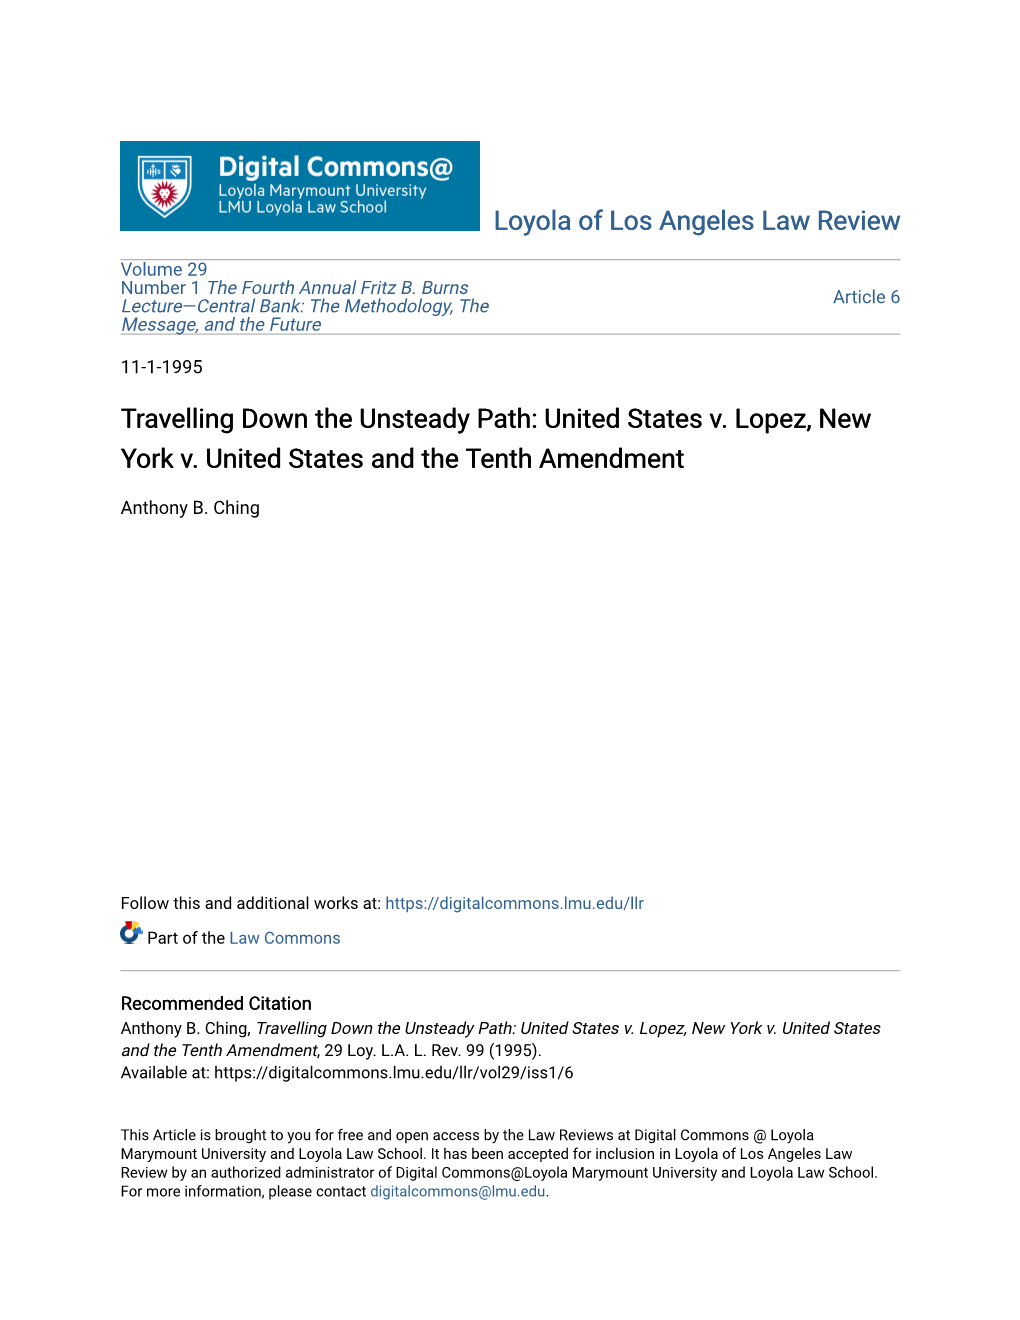 Travelling Down the Unsteady Path: United States V. Lopez, New York V